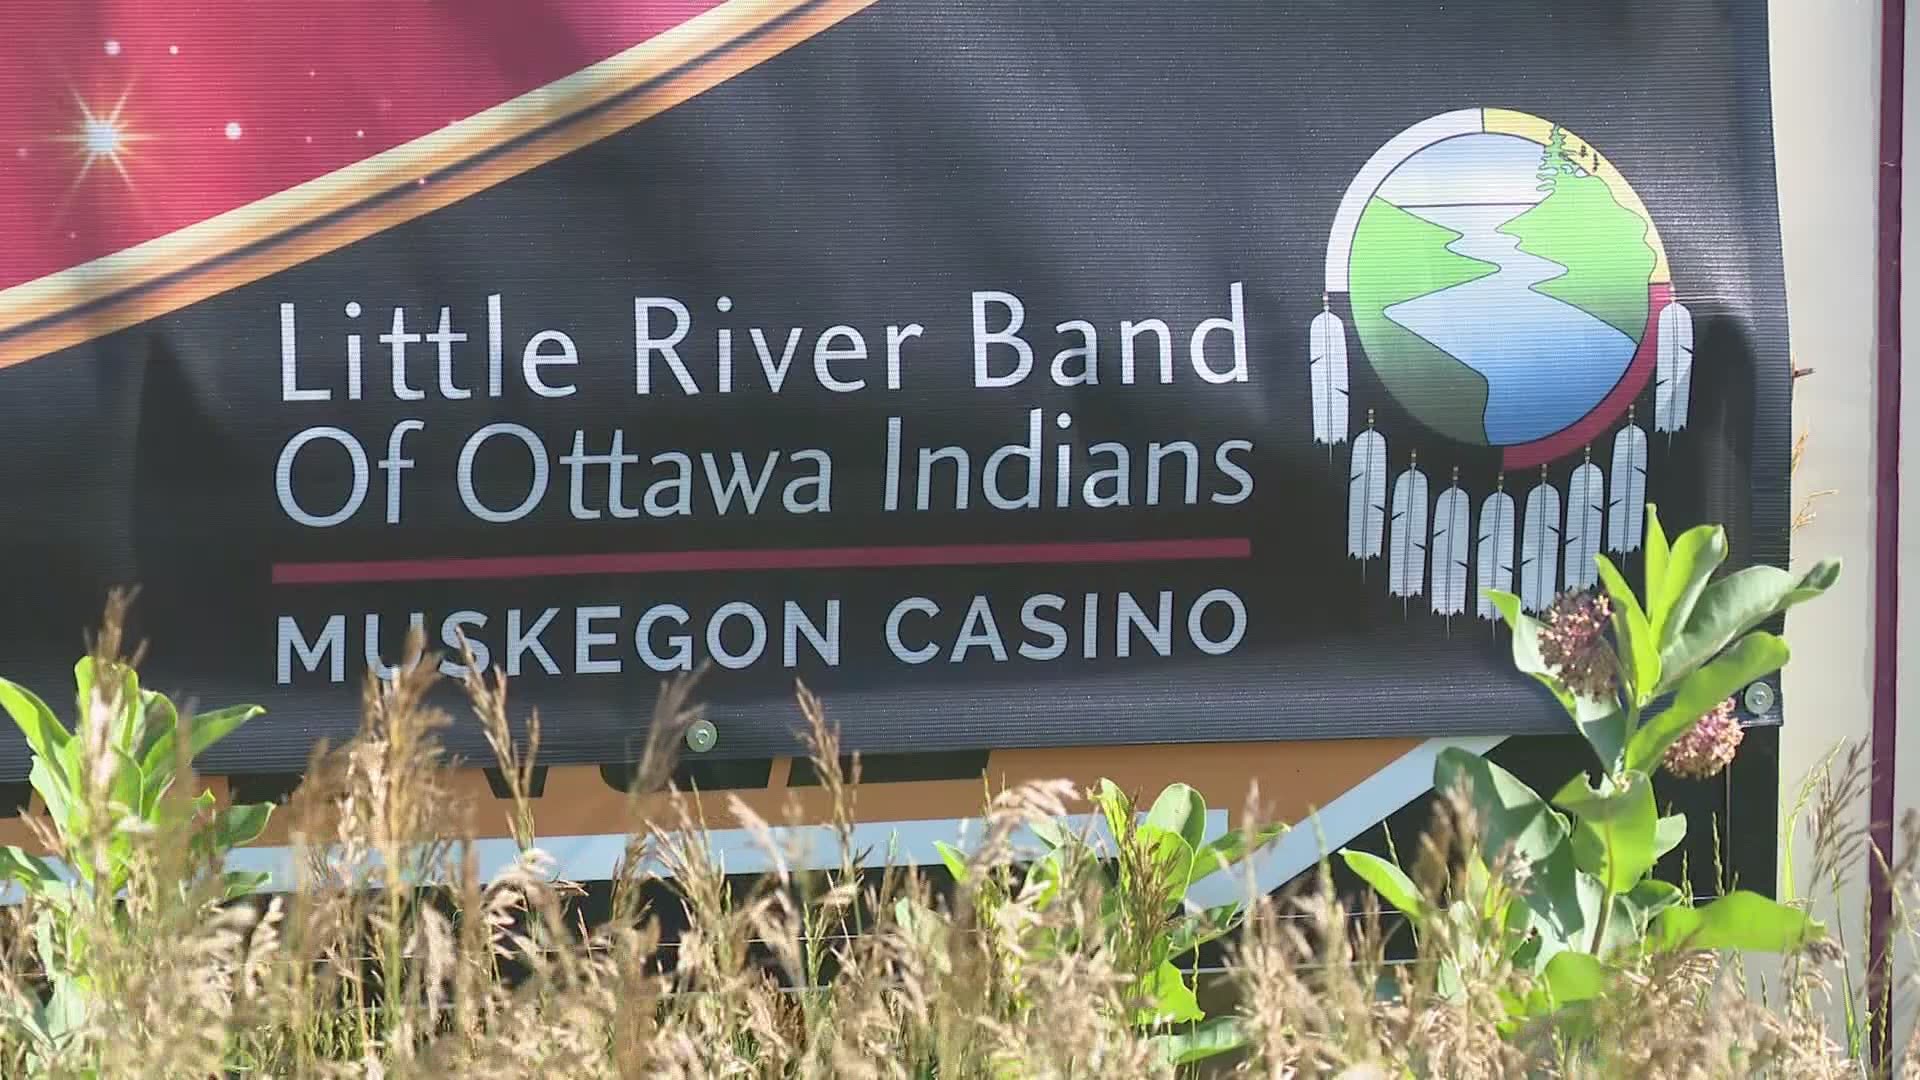 Fruitport Township property eyed for a casino remains cover in weeds as Little River Band of Ottawa Indians waits on approval from Governor Gretchen Whitmer.